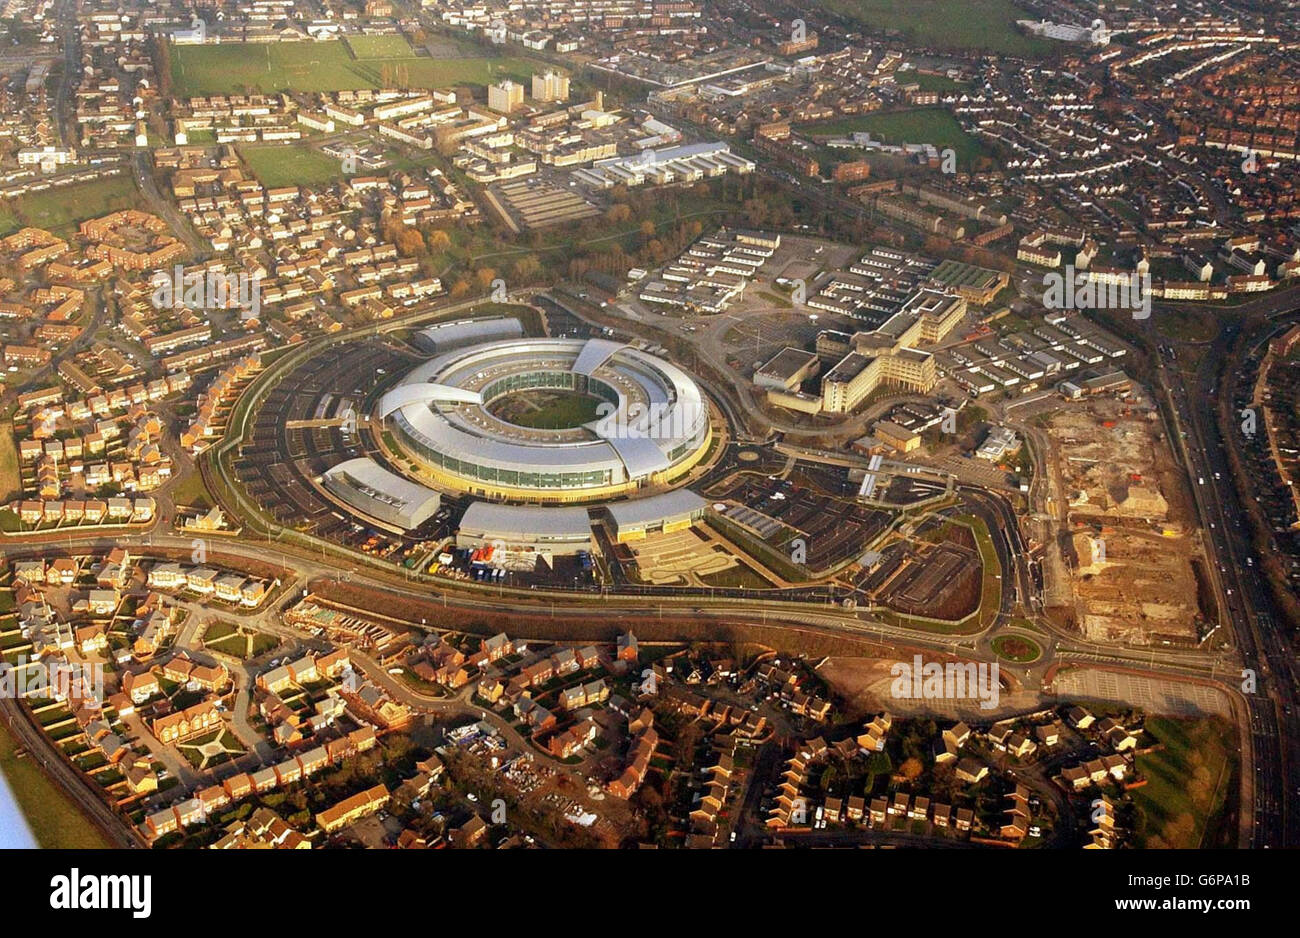 The new Government Communication Headquarters (GCHQ) on the west of Cheltenham. 1,500 of the 4,000 staff have already moved into the 330 million building, known locally as the 'doughnut', which is due for completion later this year. GCHQ houses some of the most powerful computers in Europe and intercepts intelligence across a wide range of communications to provide support to organisations fighting drugs trafficking, arms proliferation and terrorism. Stock Photo